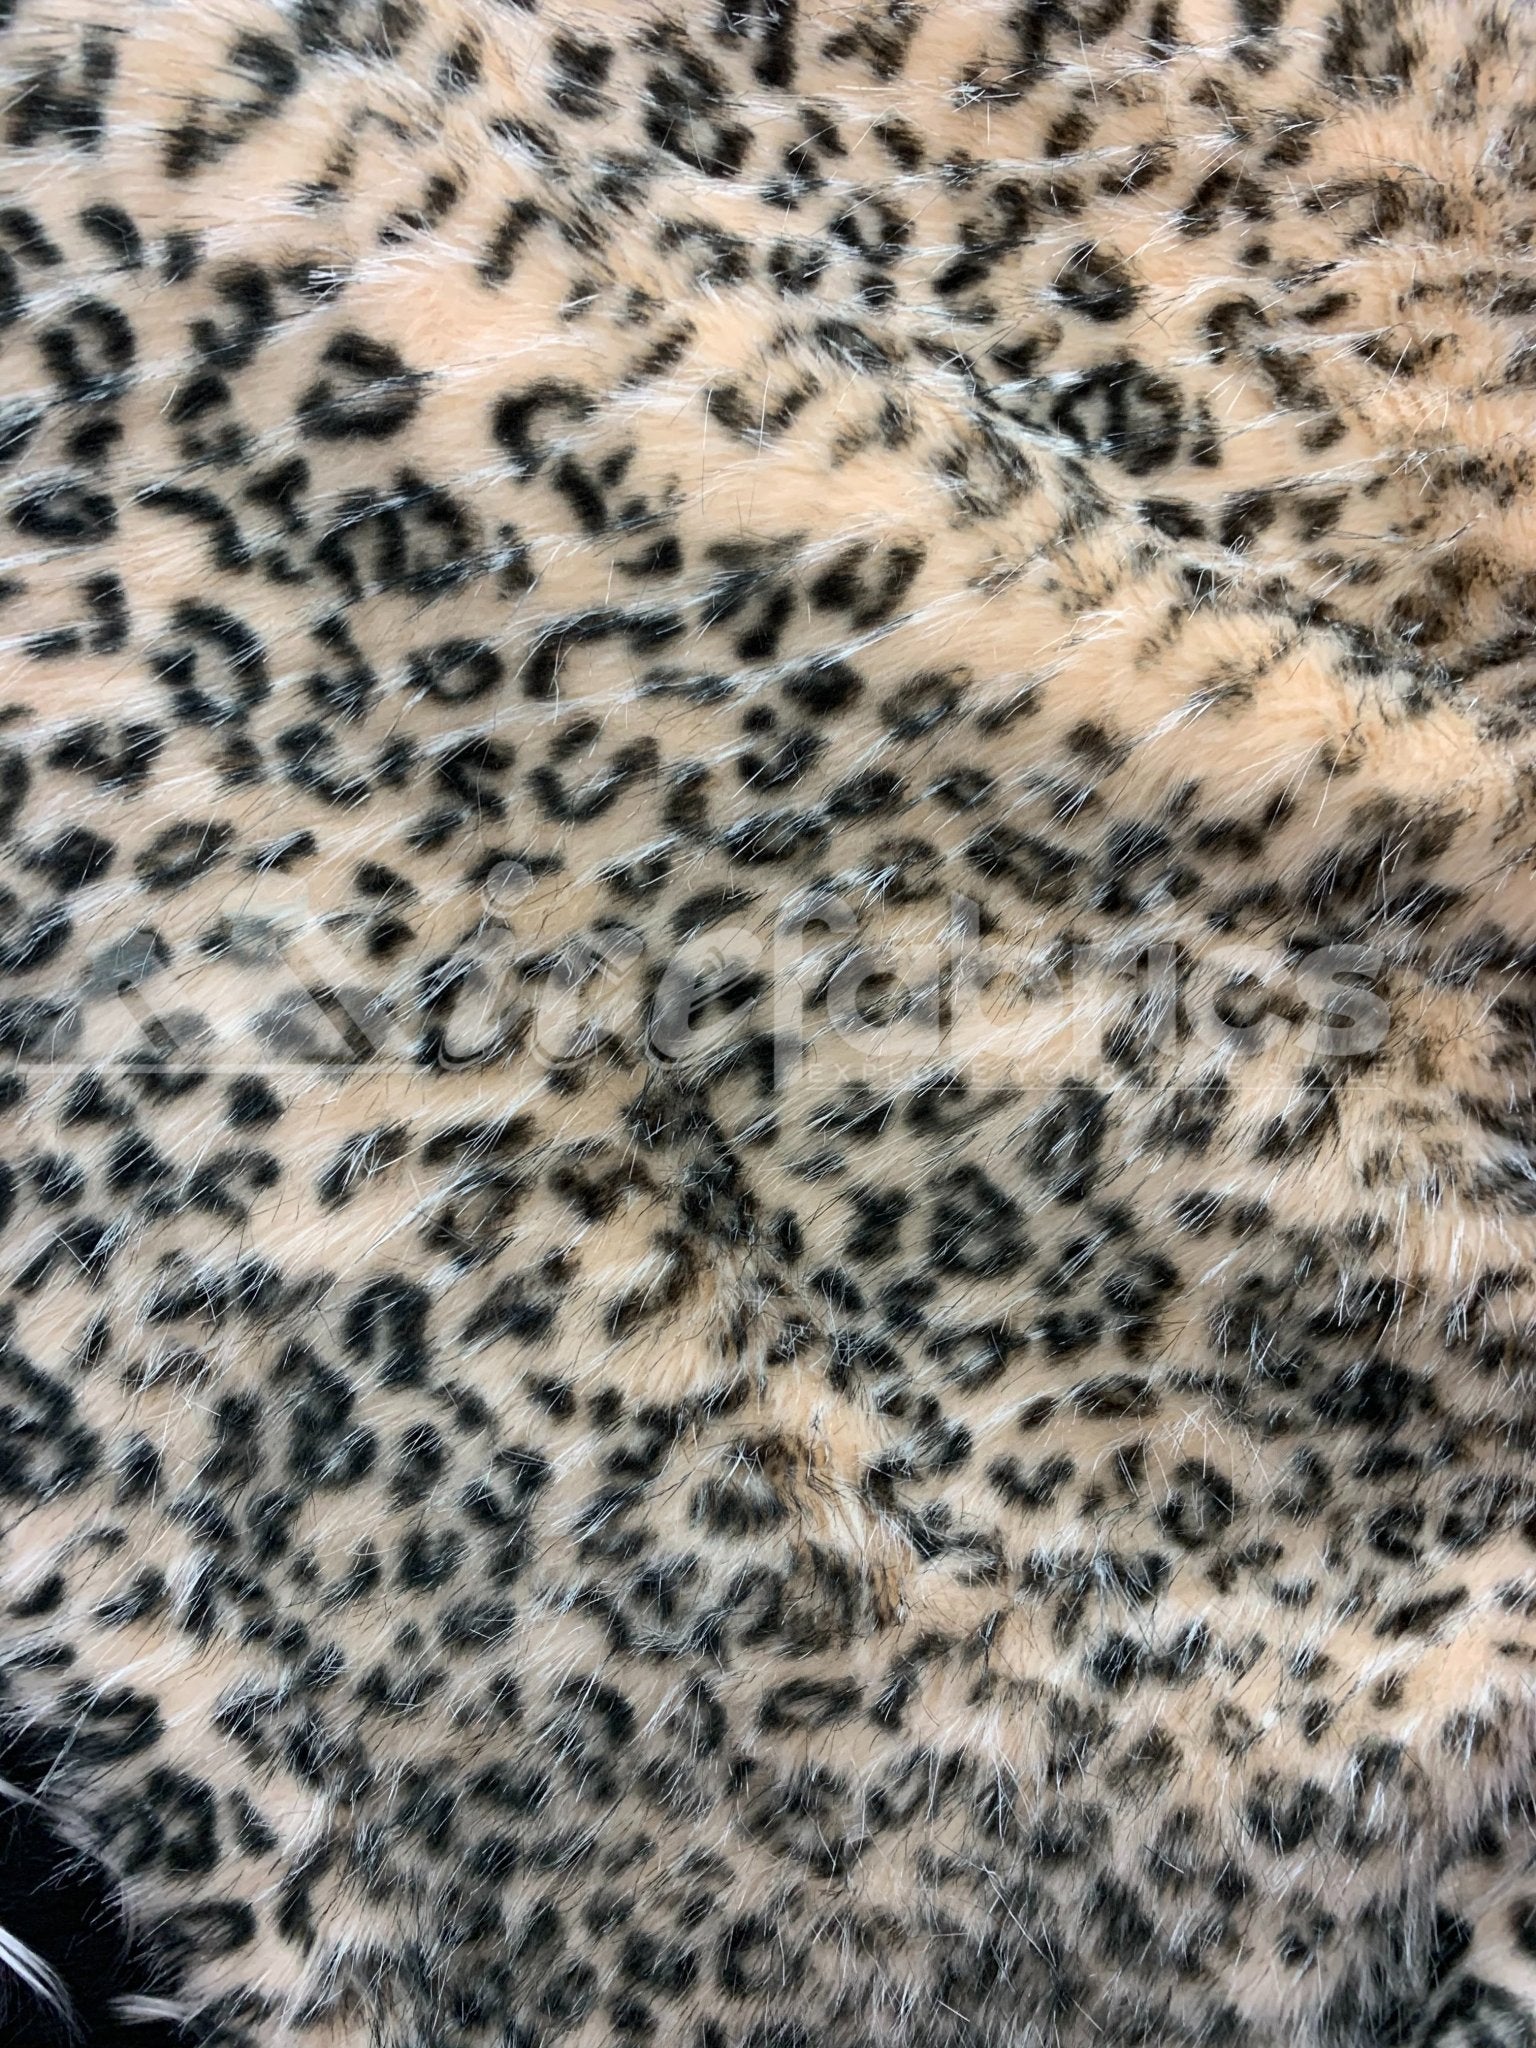 Long Pile Fake Animal Leopard Faux Fur Fabric By The Yard | Fur MaterialICEFABRICICE FABRICSBy The Yard (60 inches Wide)Long Pile Fake Animal Leopard Faux Fur Fabric By The Yard | Fur Material ICEFABRIC